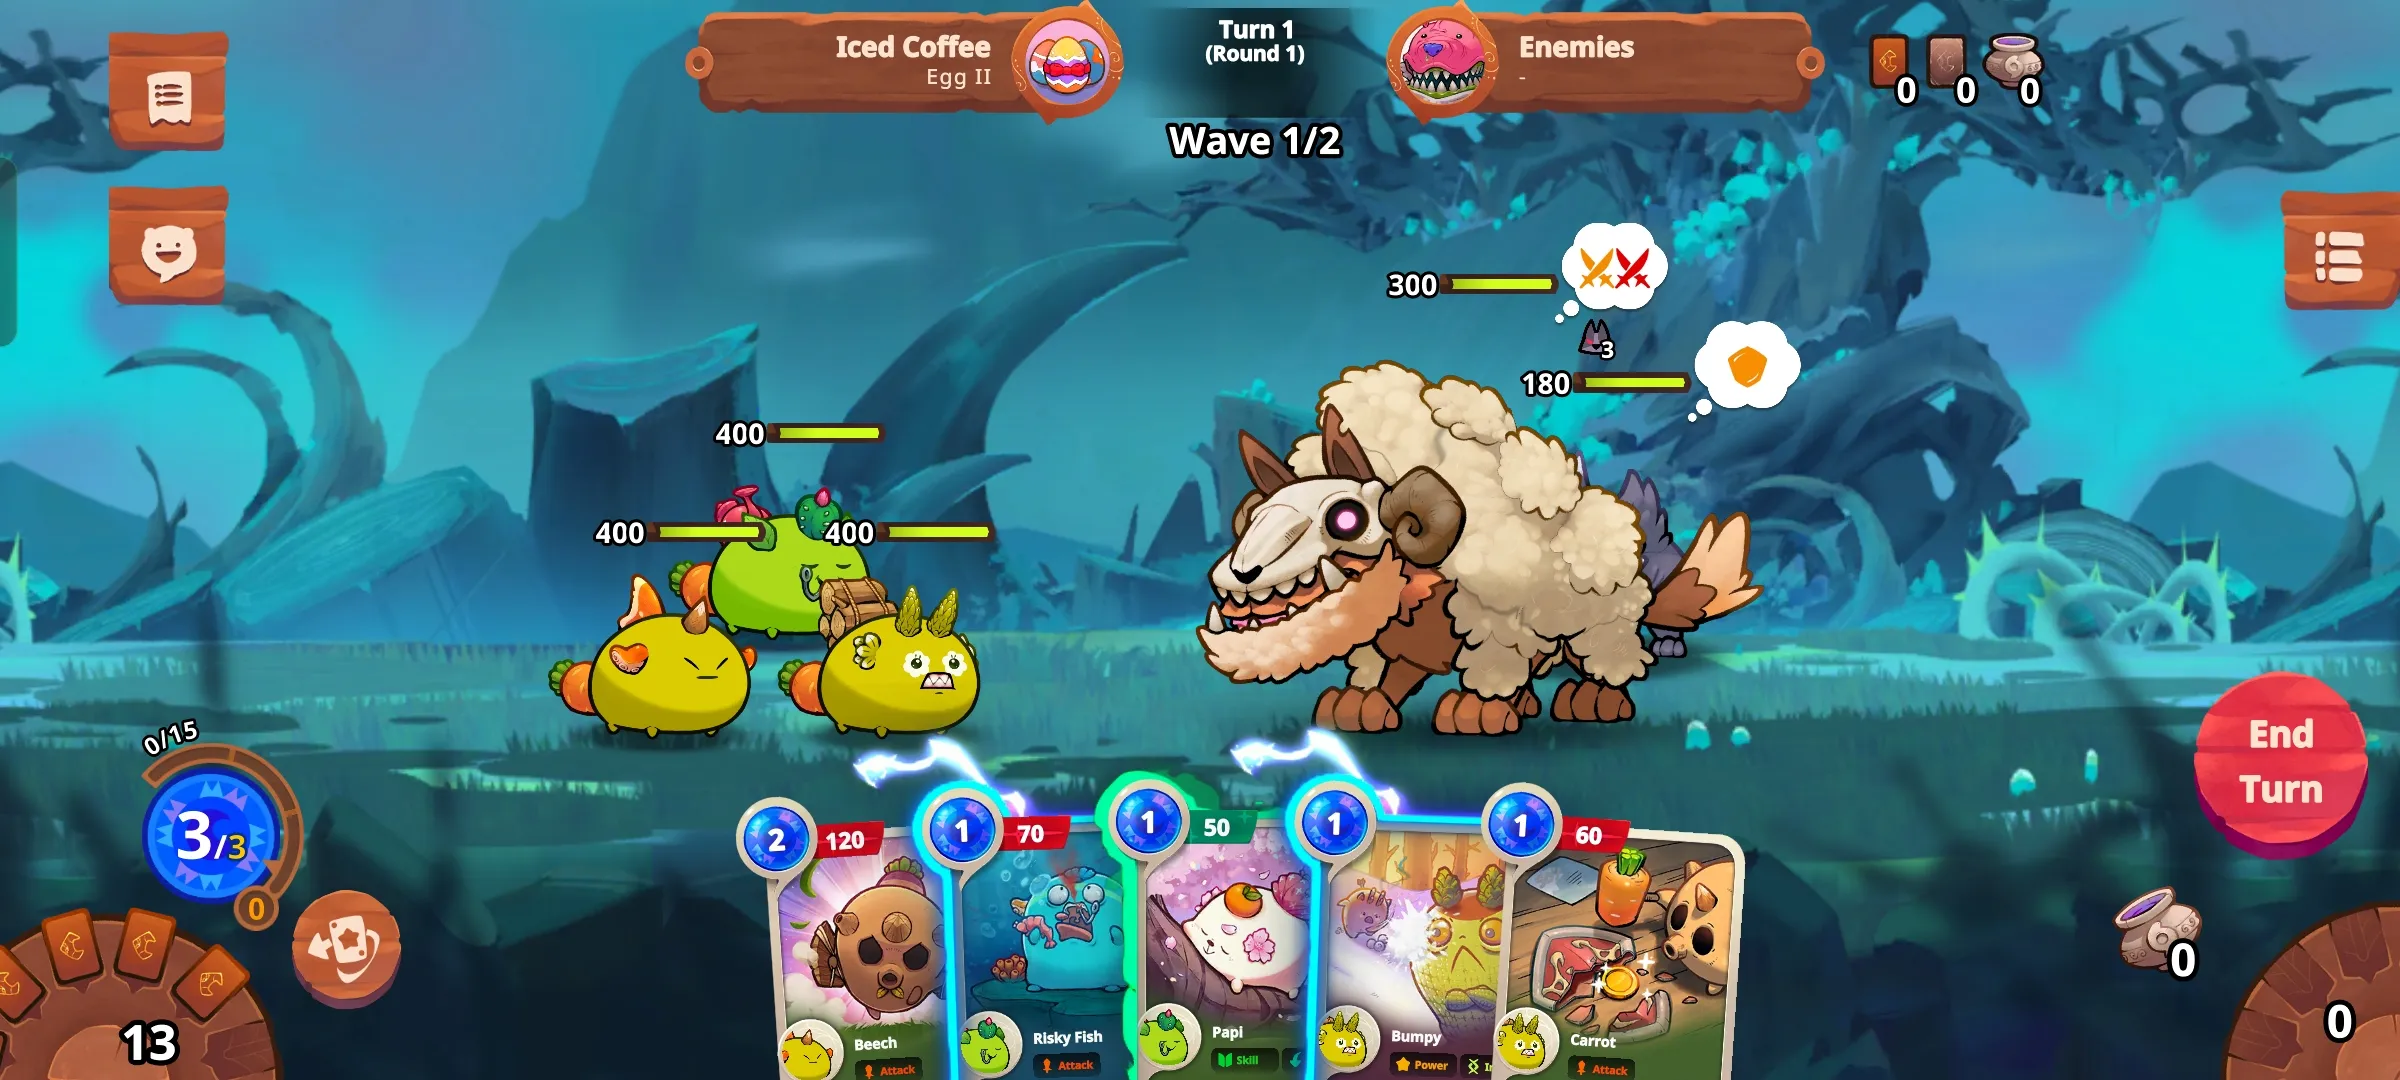 Axie Infinity Origins Adventure mode is where players play against powerful Chimeras. Players must kill these monsters to progress, and earn rewards.